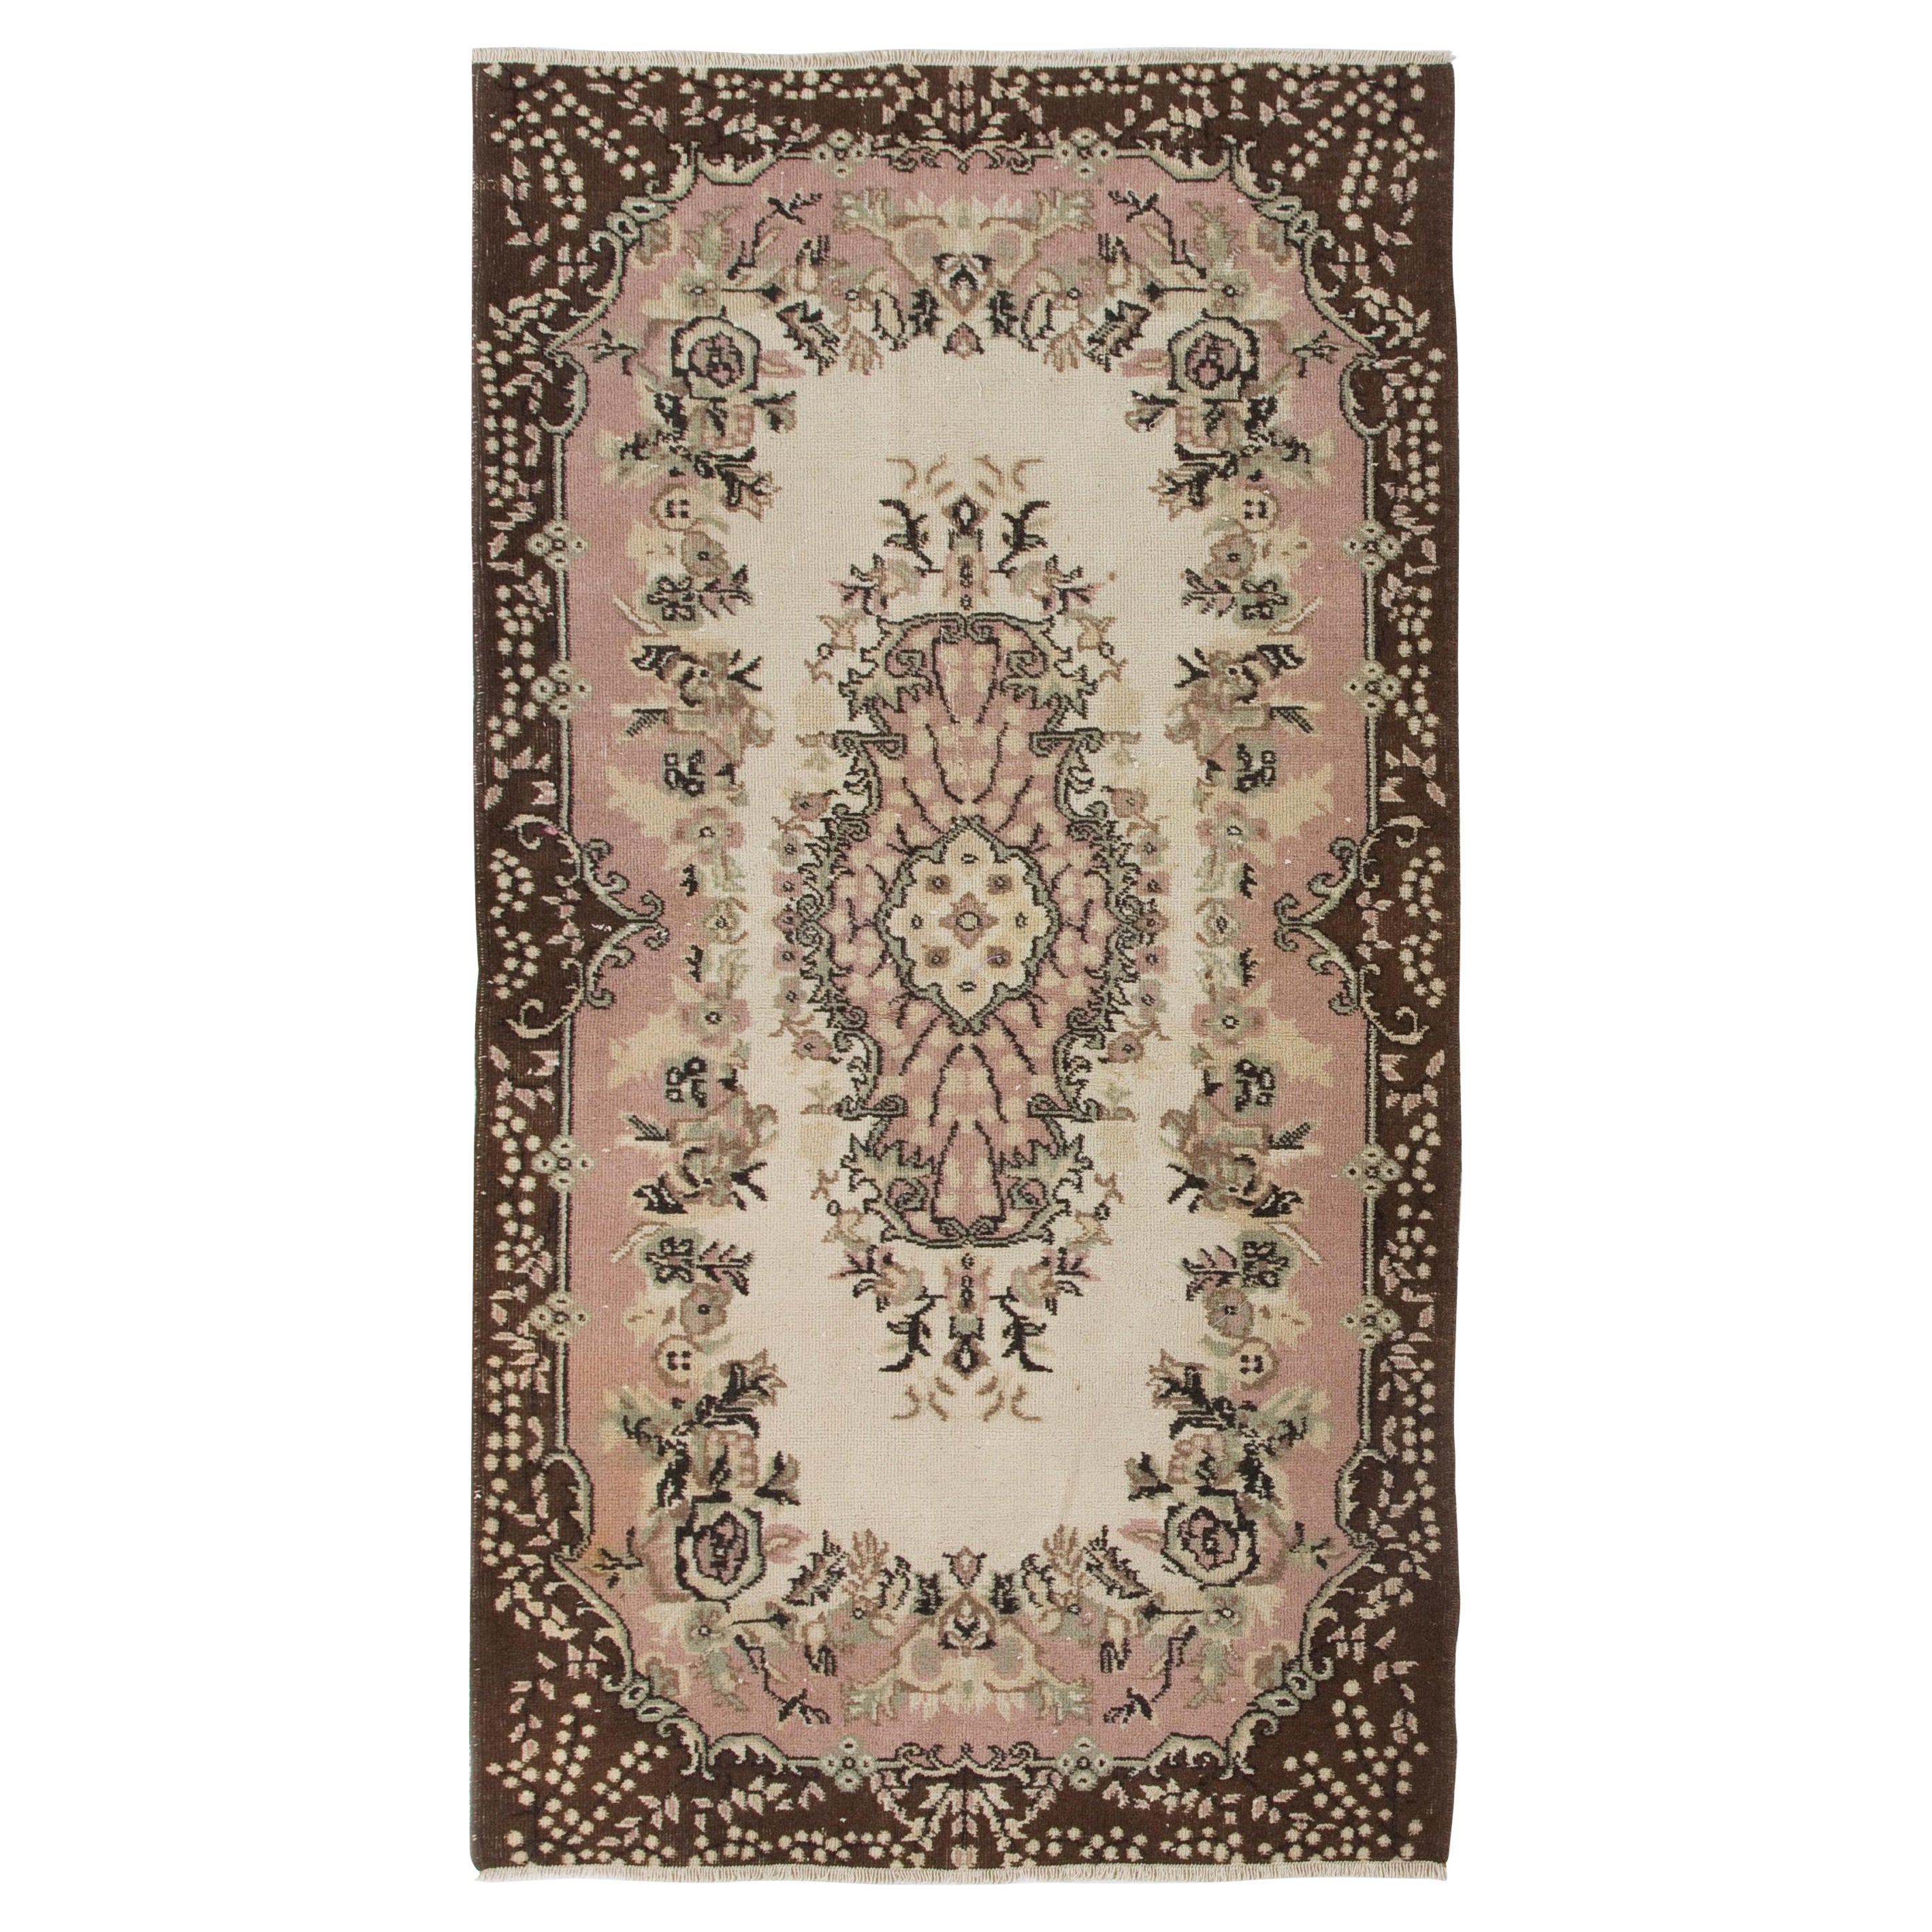 4x7 Ft Vintage Hand-Knotted Turkish Accent Rug with Floral Medallion Design